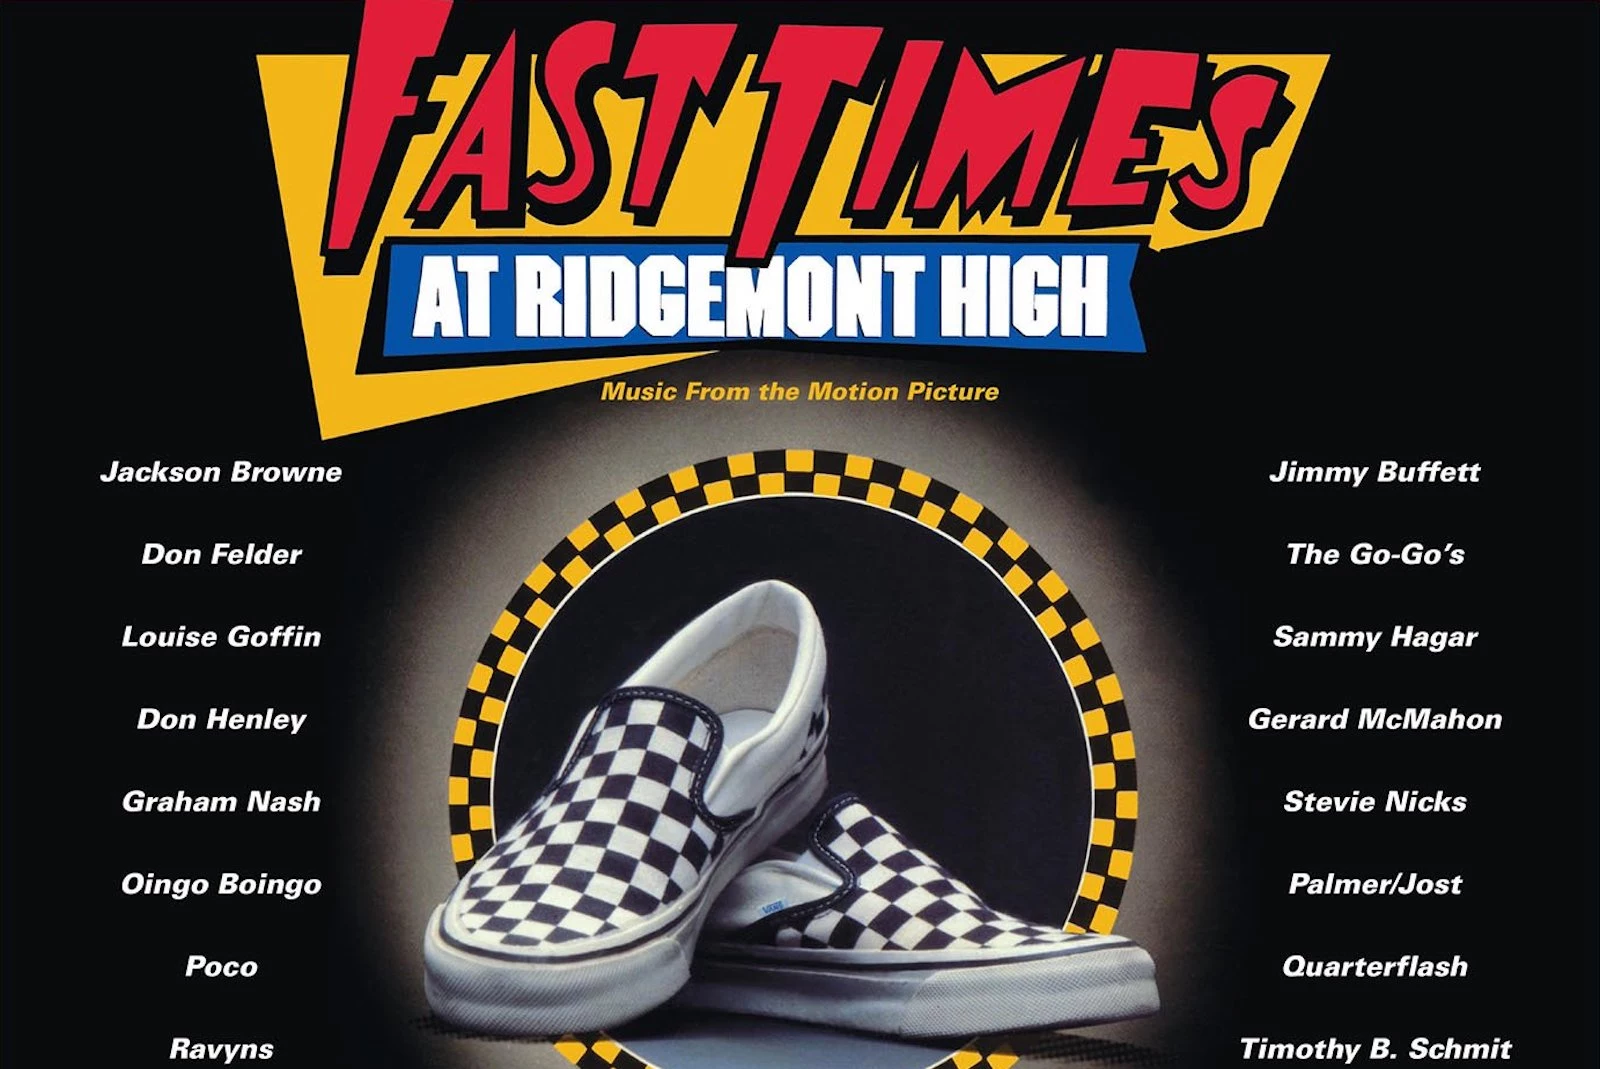 How 'Fast Times at Ridgemont High' Soundtrack Ushered in the '80s